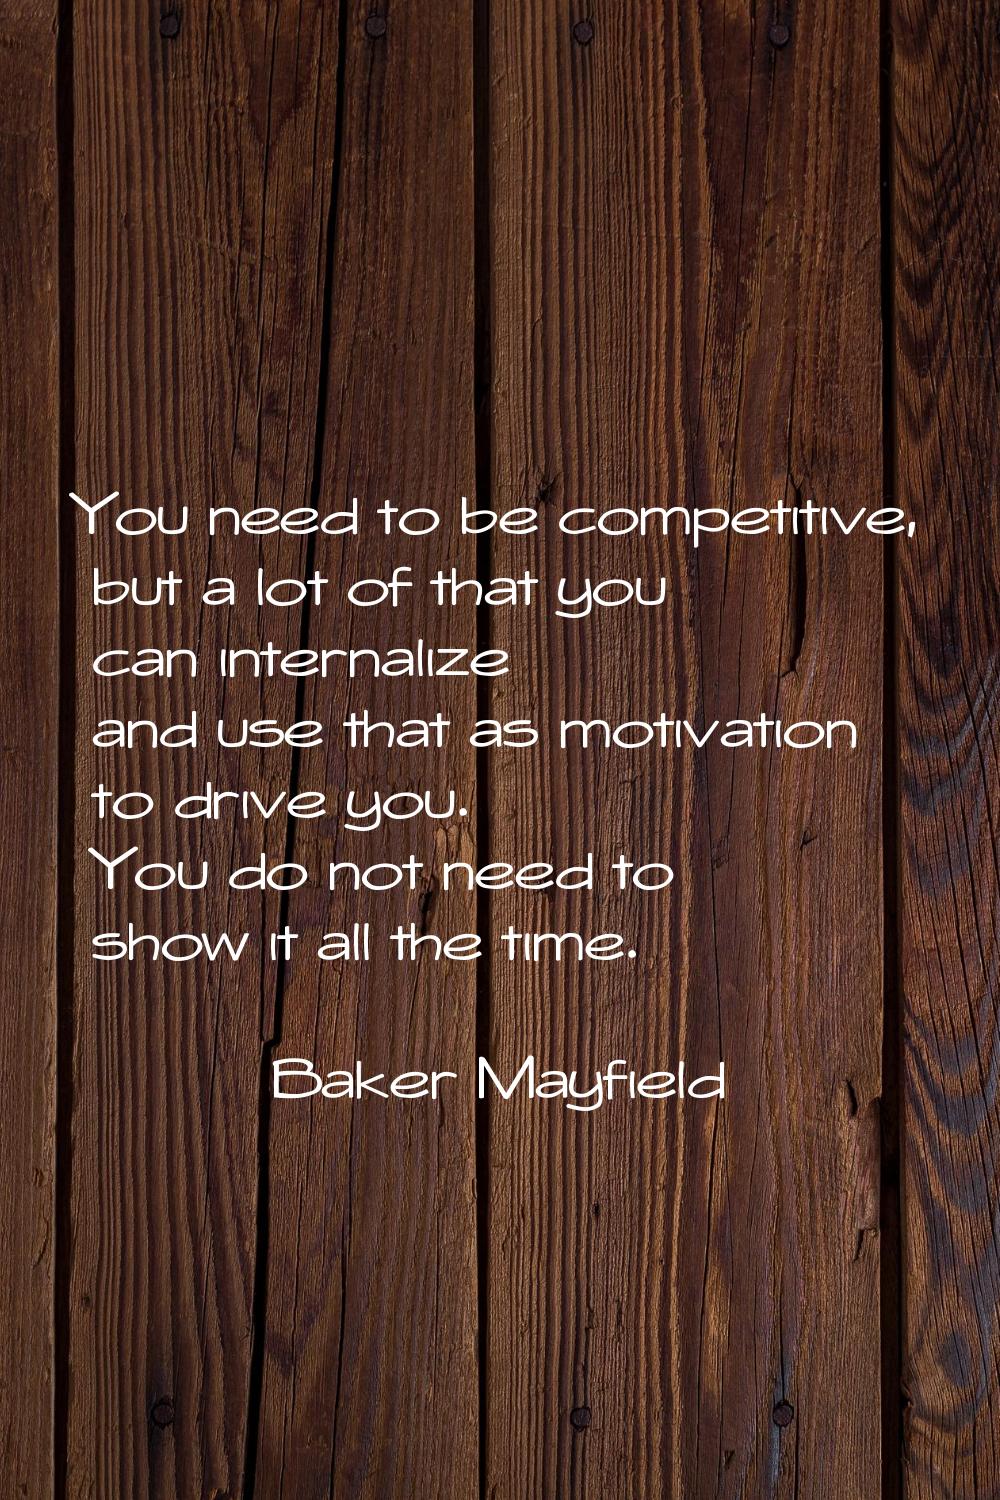 You need to be competitive, but a lot of that you can internalize and use that as motivation to dri